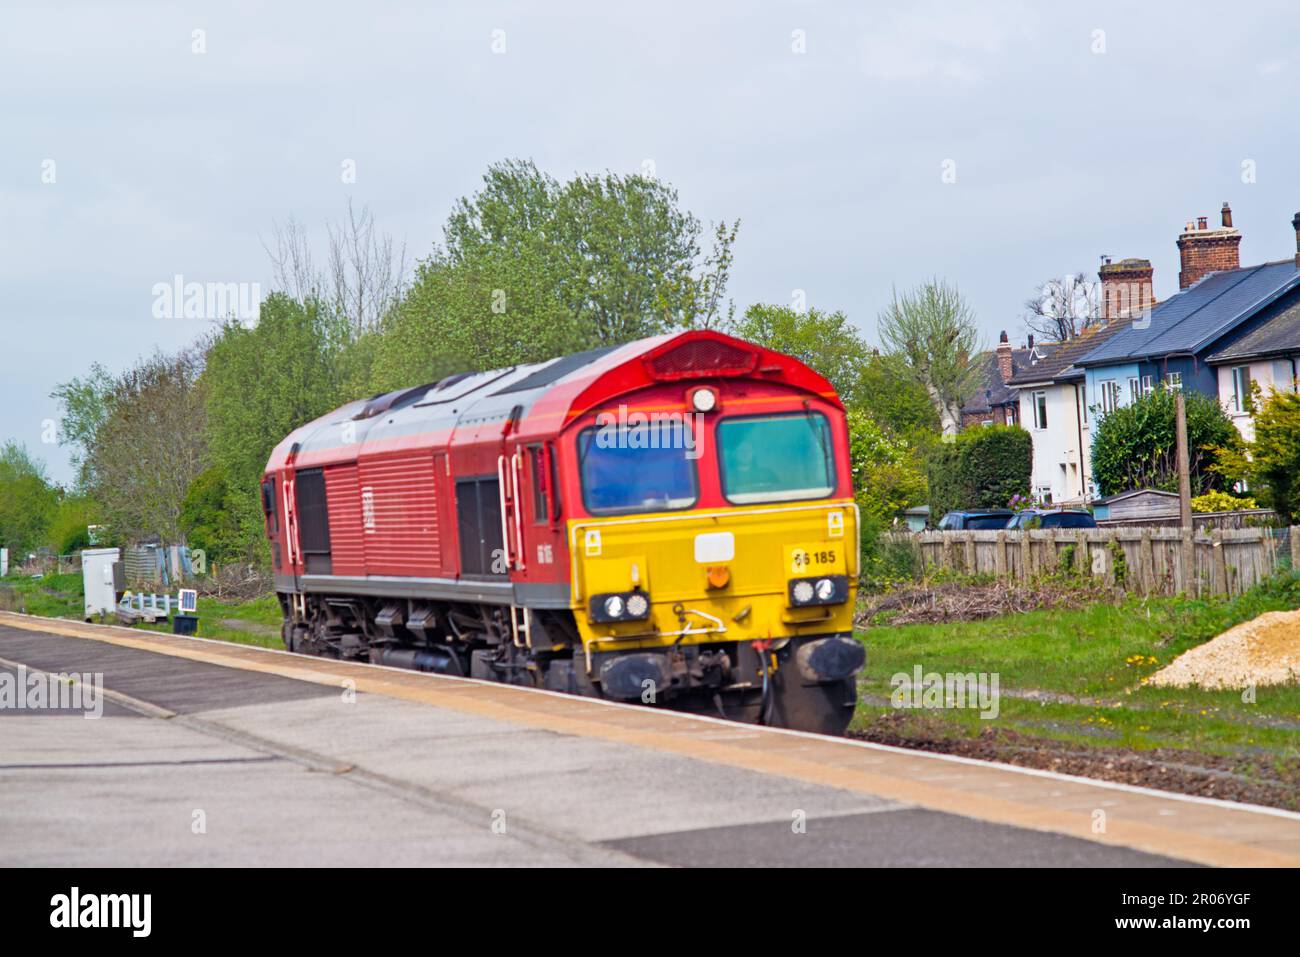 DB Shenker Class 66185 light engine at Eaglescliffe Railway station, Cleveland, England Stock Photo